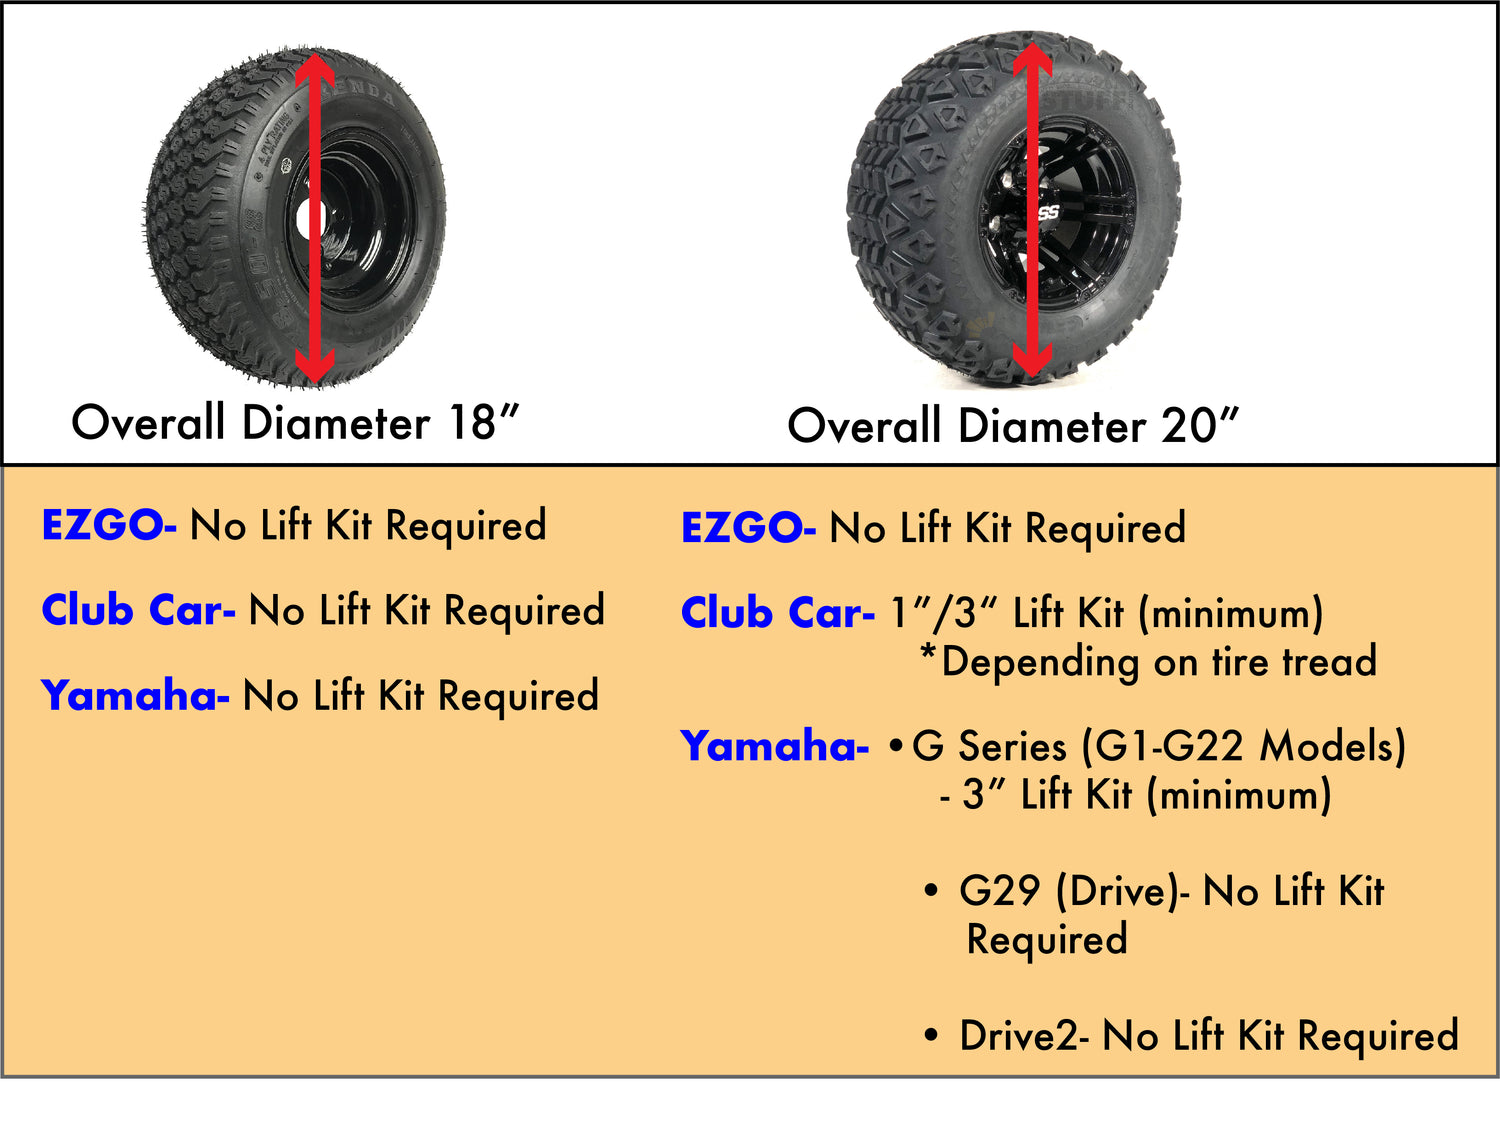 Wheel and Tire Sizing Guide For 18" and 20" Wheel and Tire Combos